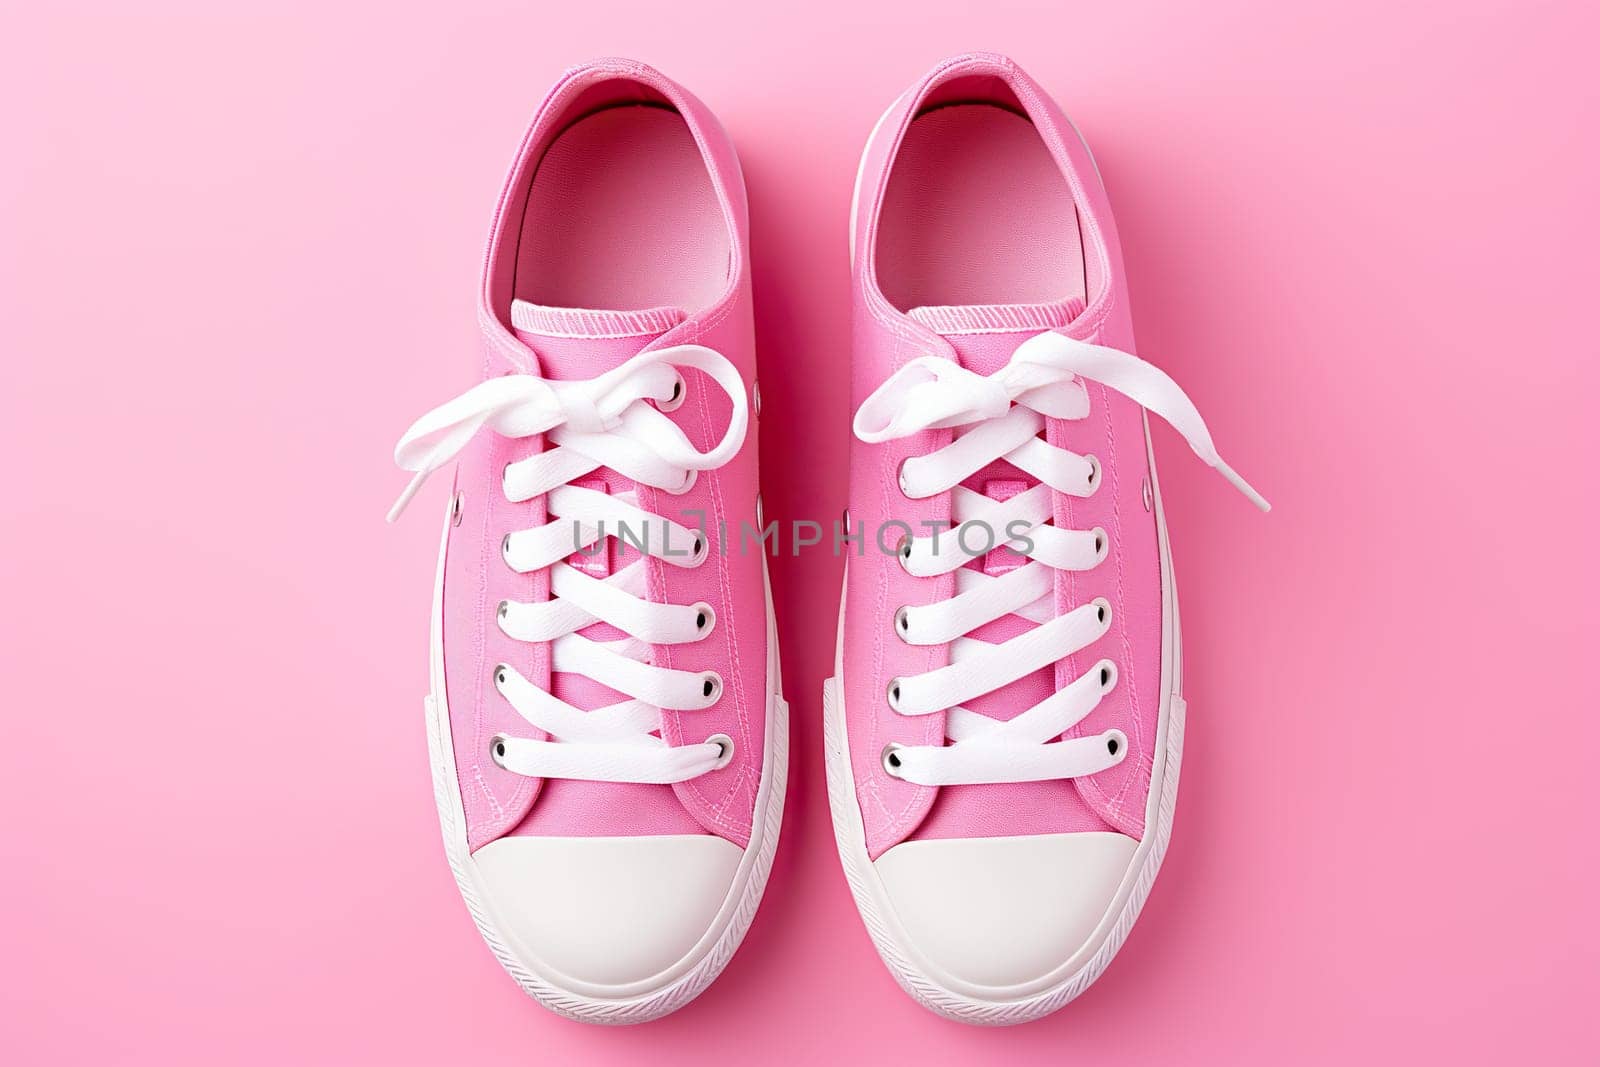 New pair of pink sneakers on pink background. Lifestyle, sneaker sport shoe. Top view. Generated by artificial intelligence